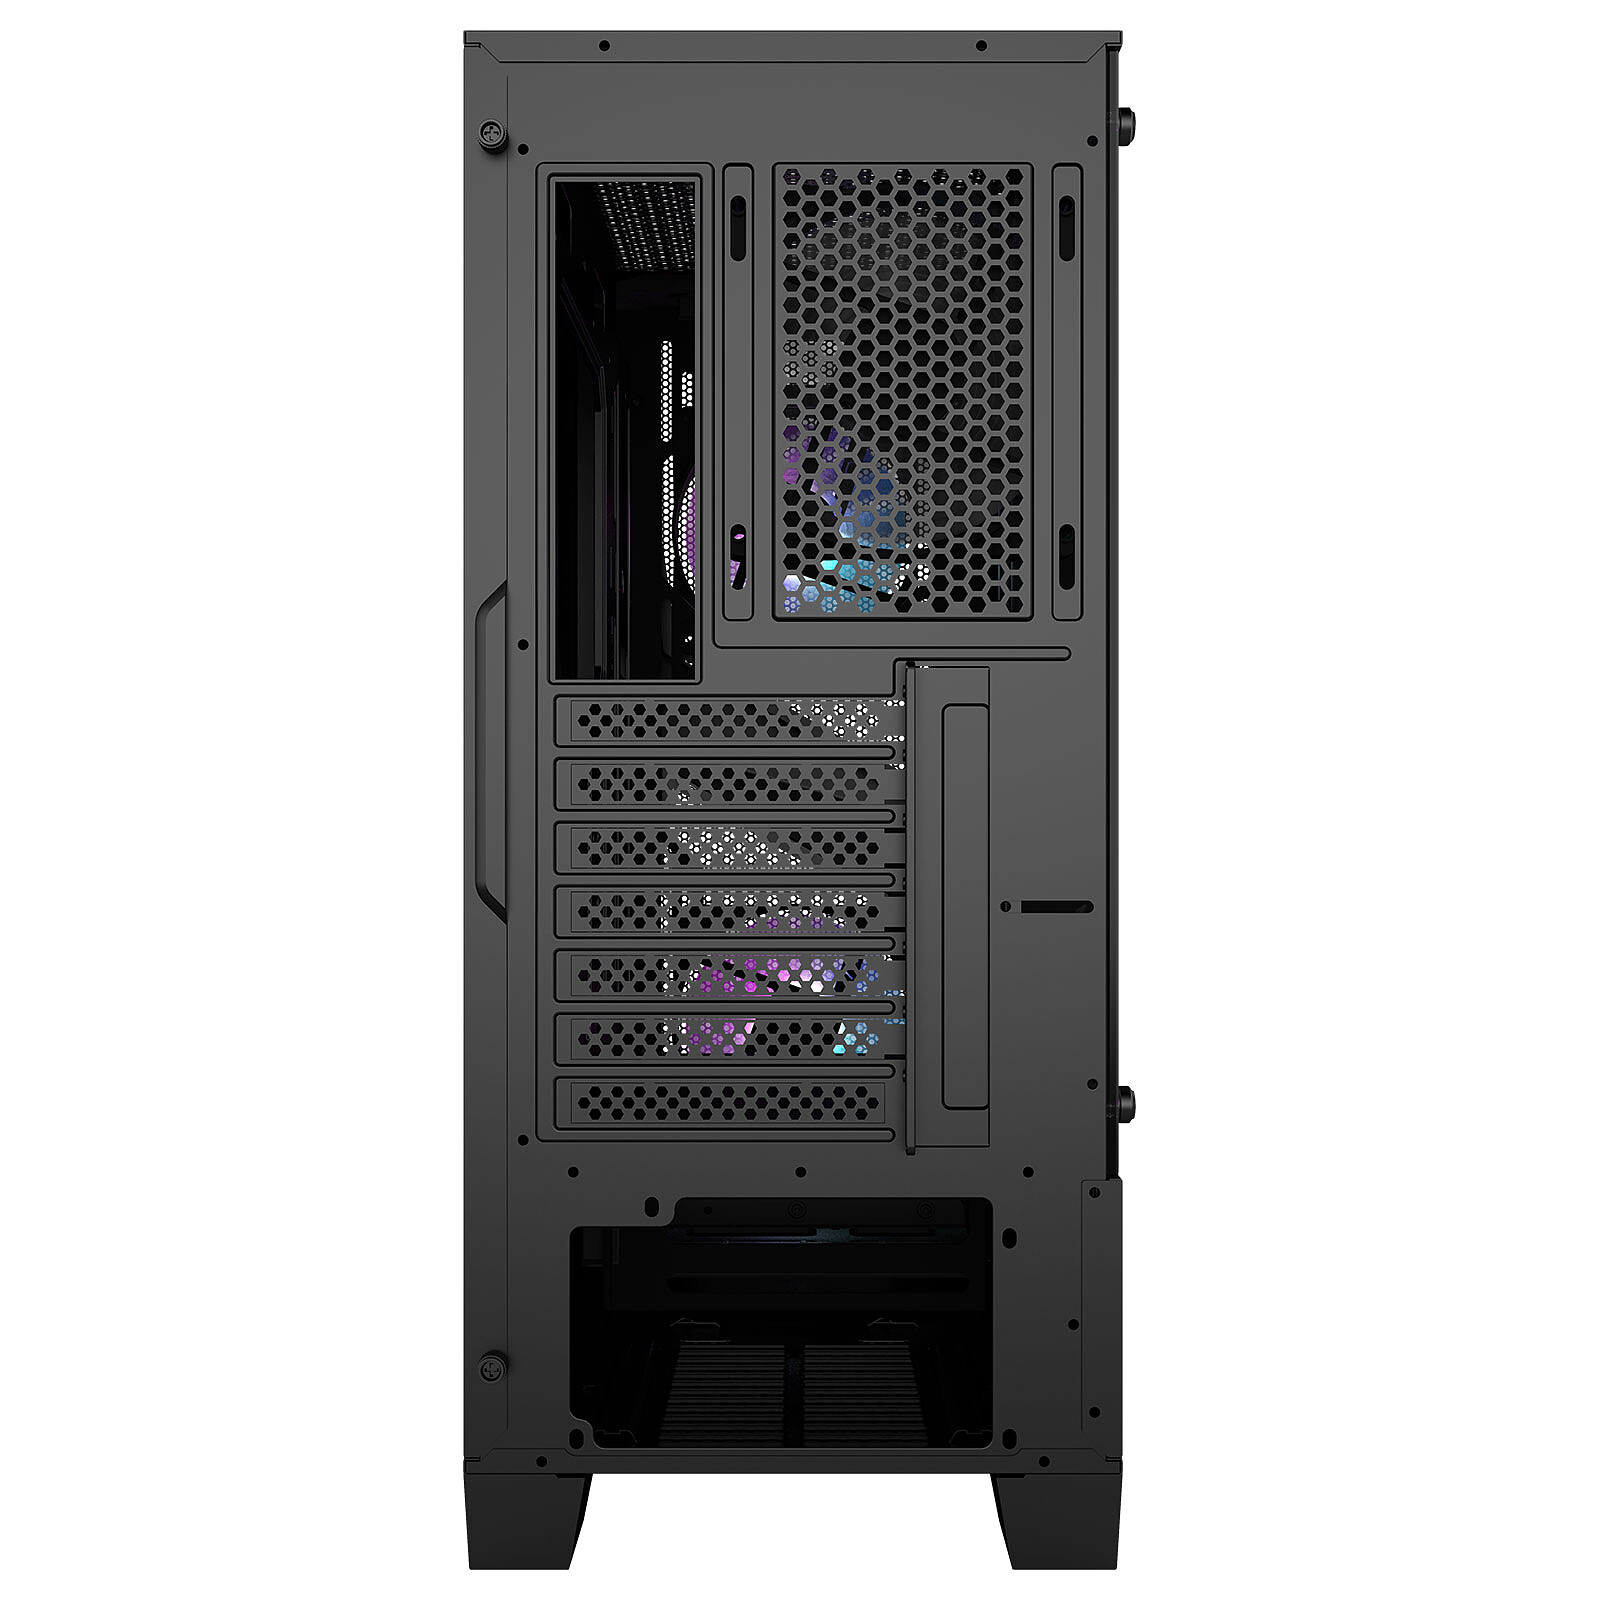 MSI MAG FORGE 100R - PC cases - LDLC 3-year warranty